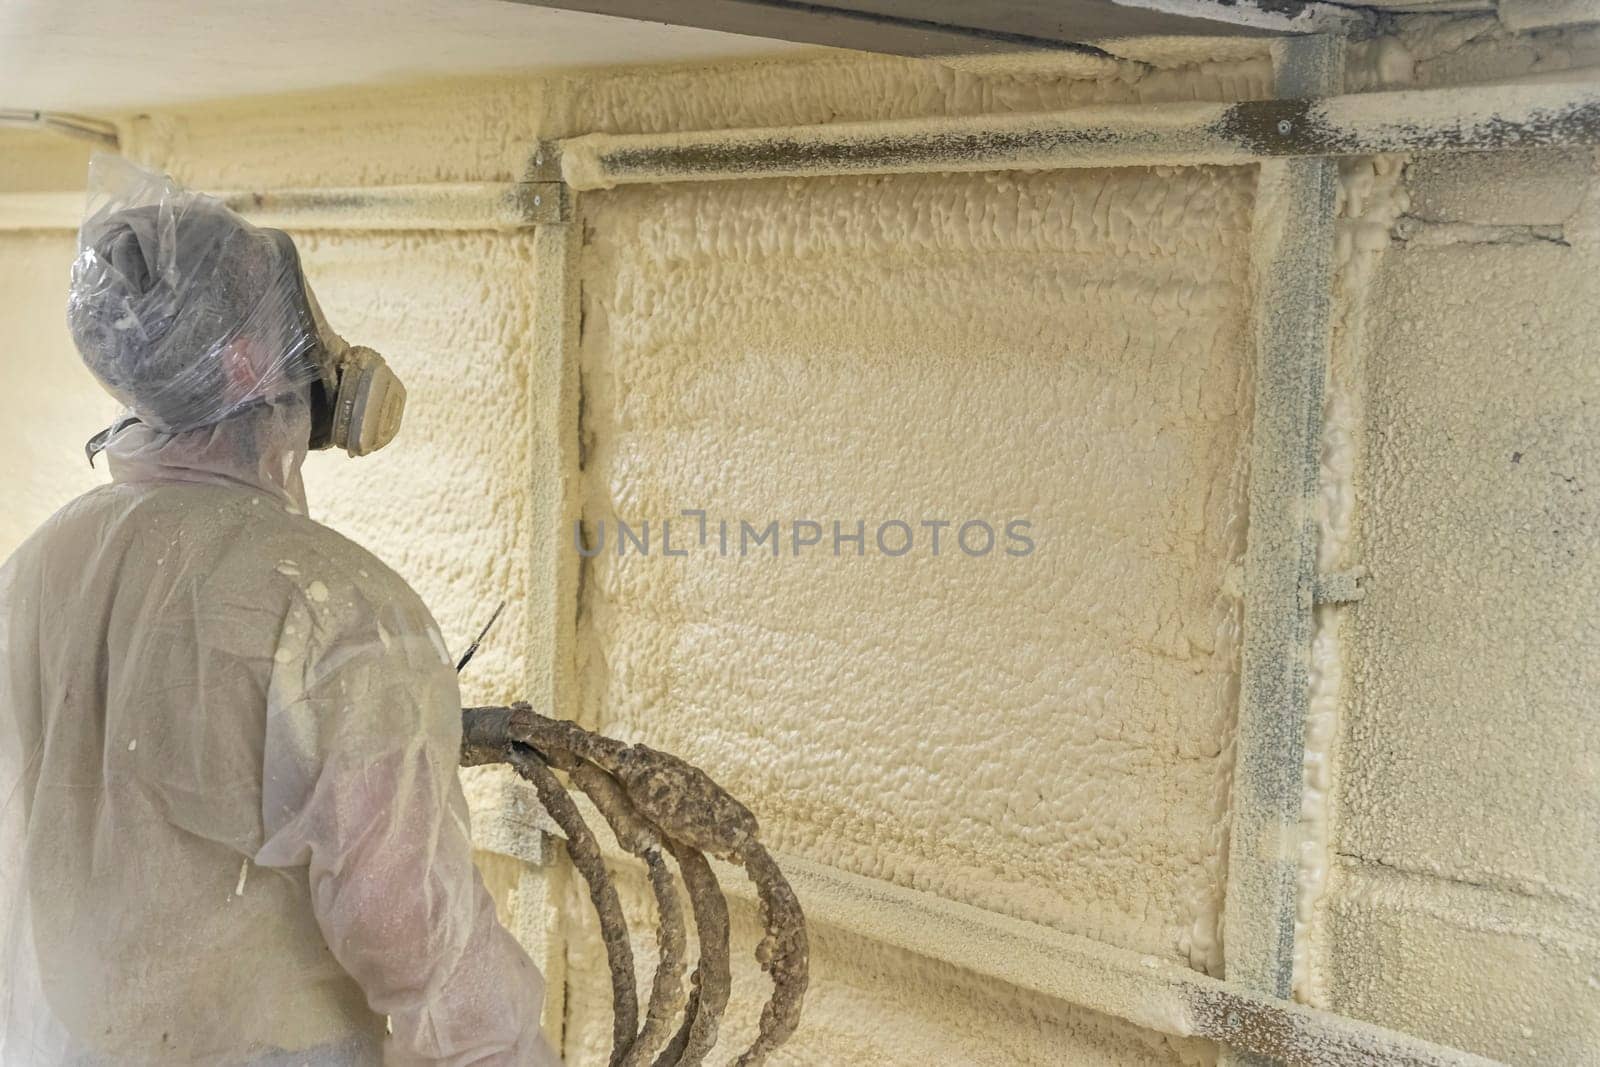 worker in a protective suit insulates the walls with polyurethane foam by audiznam2609